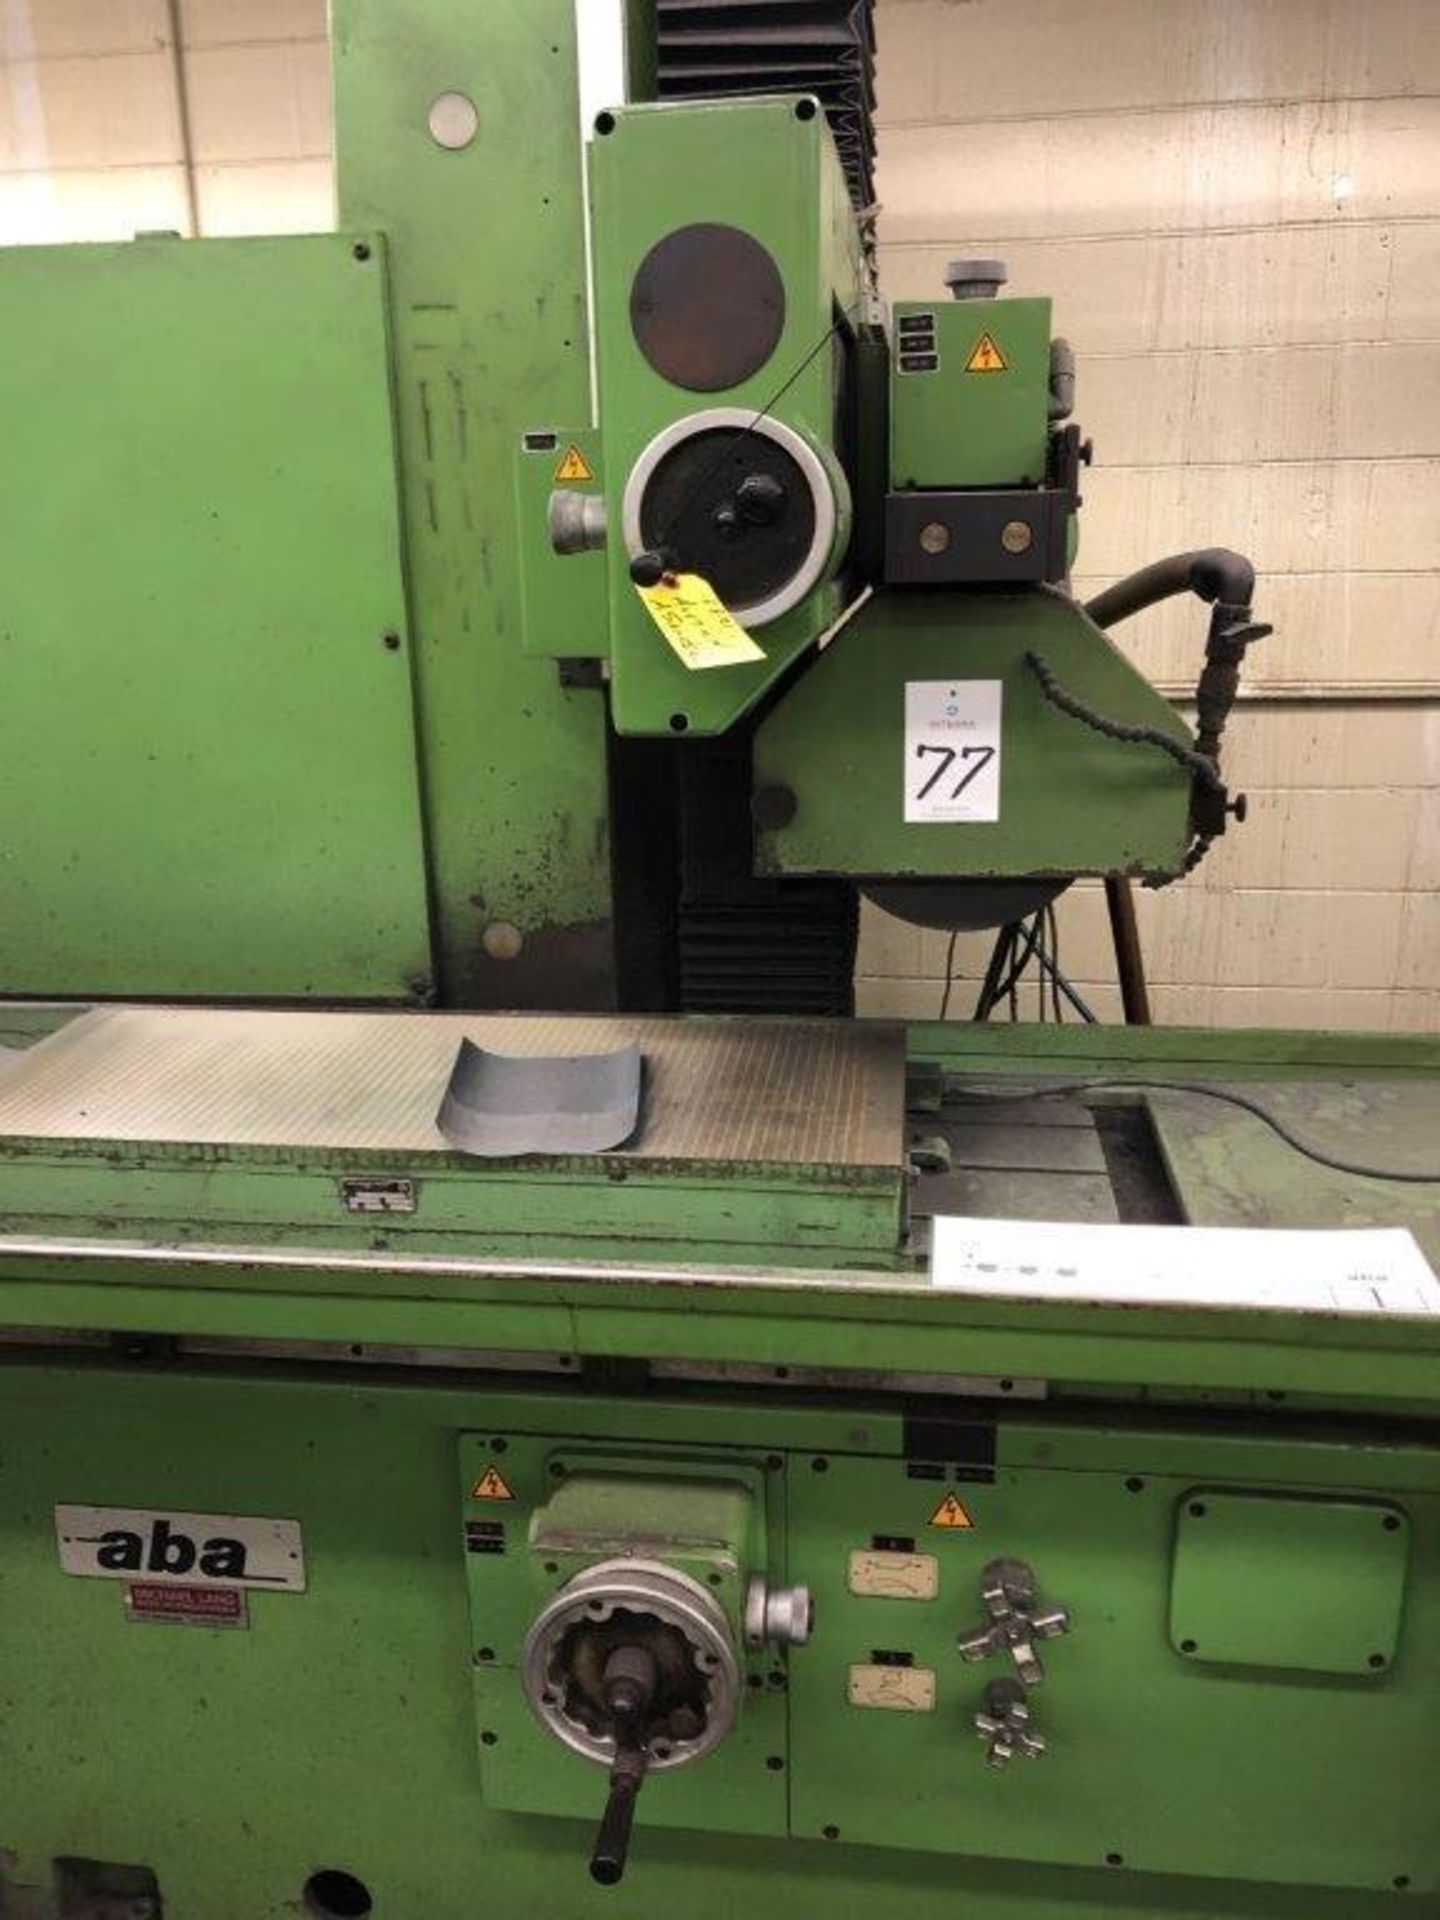 Aba FFU 1000/50 Surface Grinder, S/N 207990 (New 1986), 15.75" x 39" Electro-Magnetic Chuck - Image 2 of 10